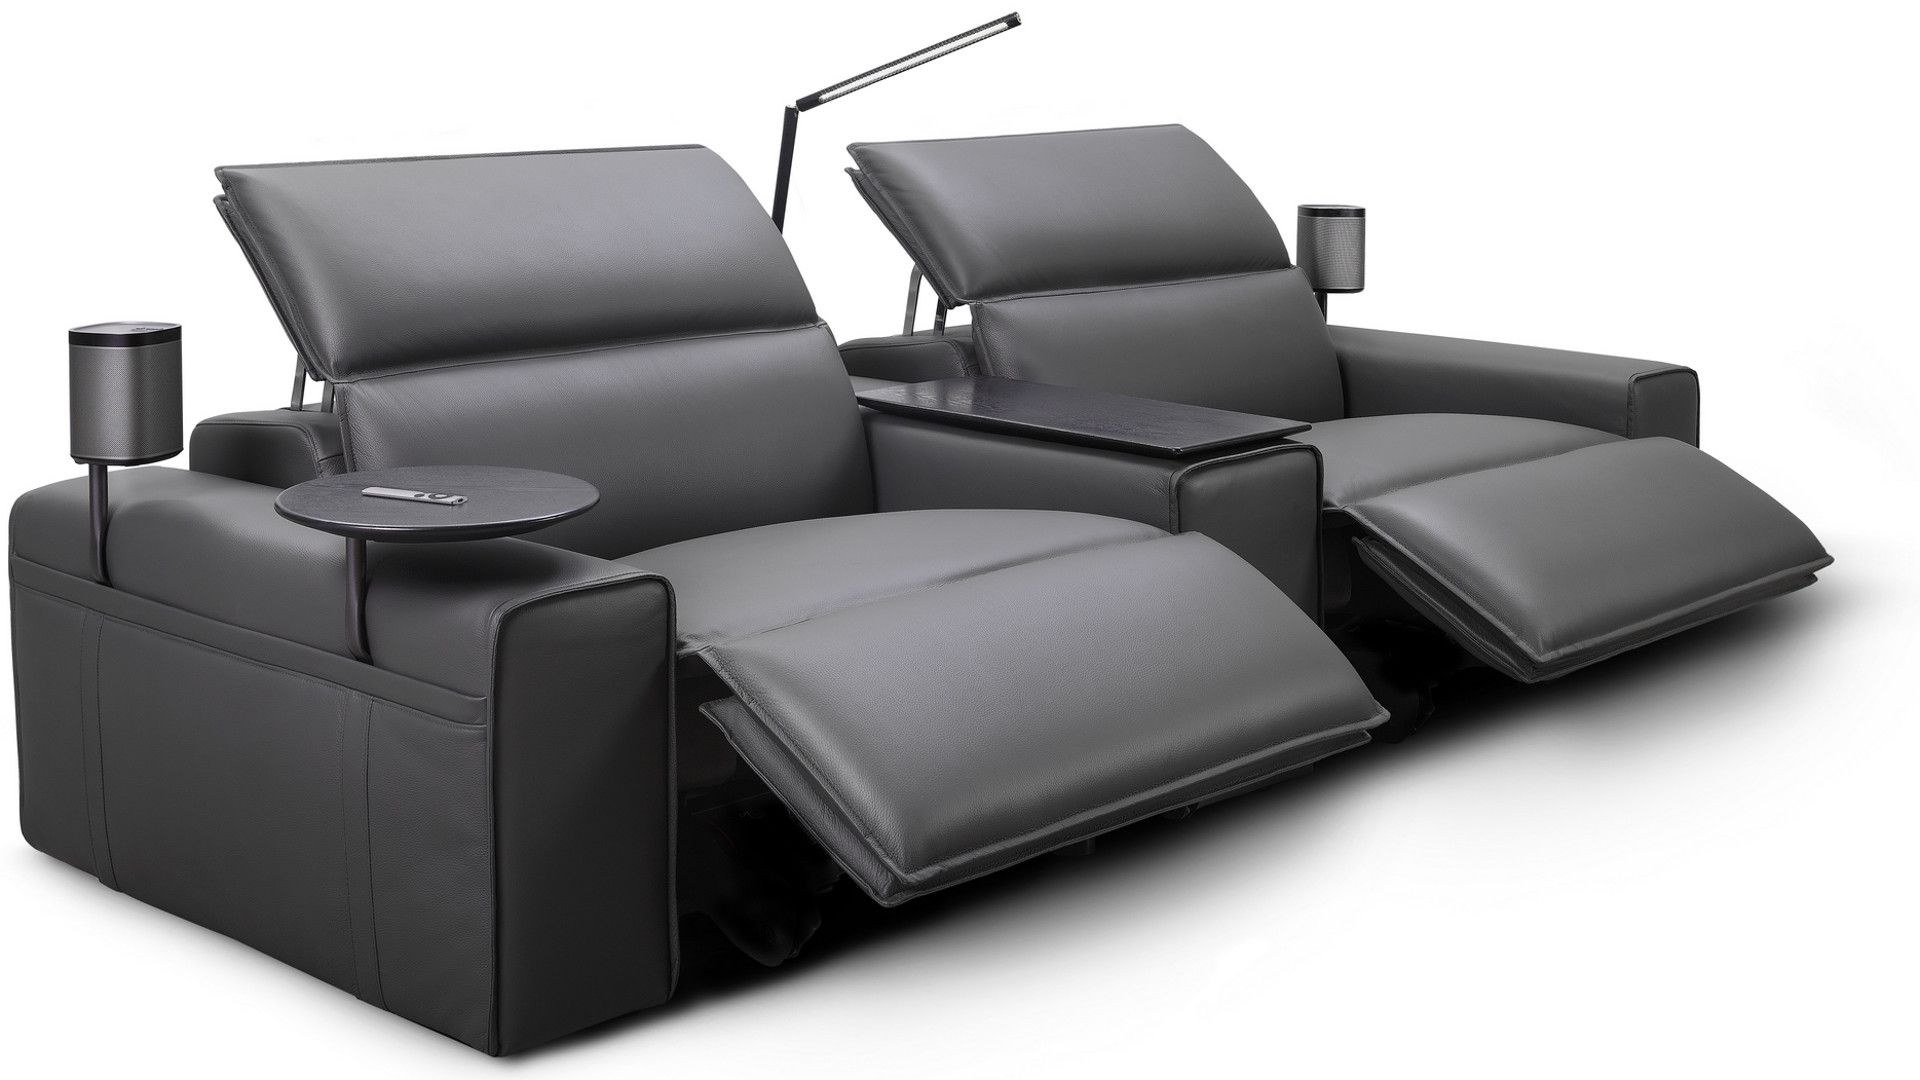 Movie Room Furniture: Cuddle Up And Enjoy The Show